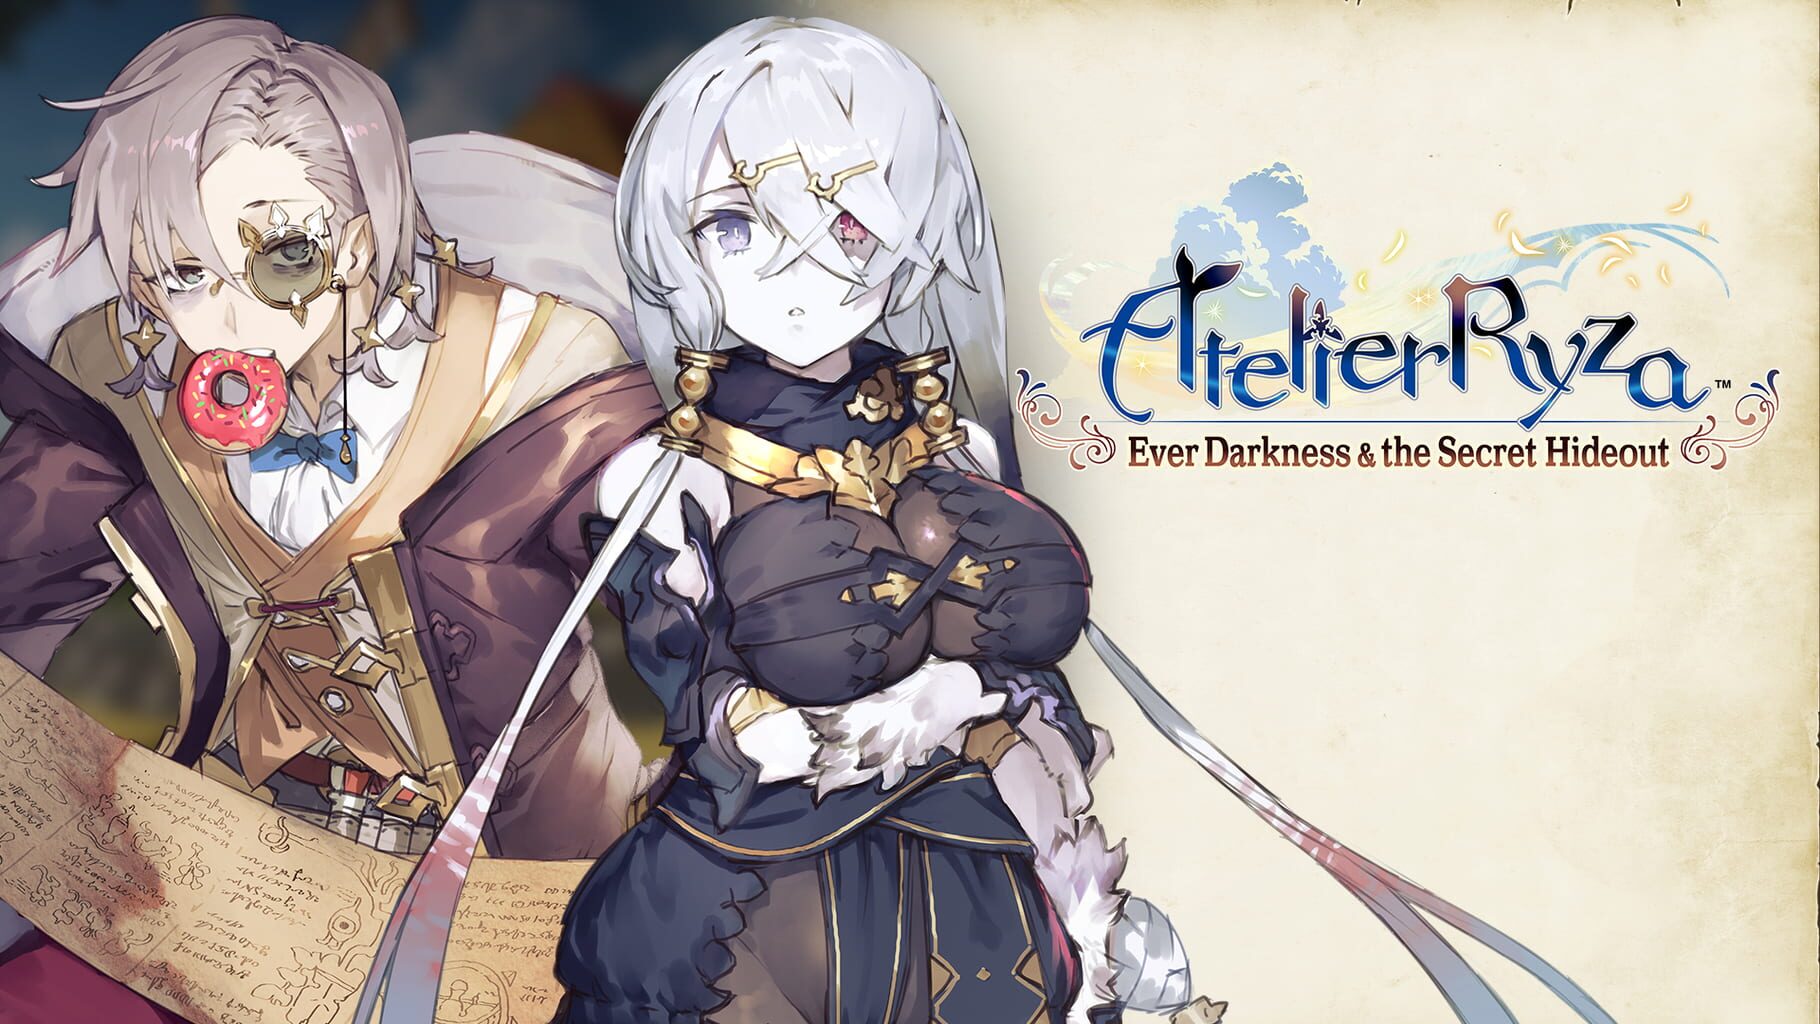 Atelier Ryza: Ever Darkness & the Secret Hideout - "The End of an Adventure and Beyond" artwork